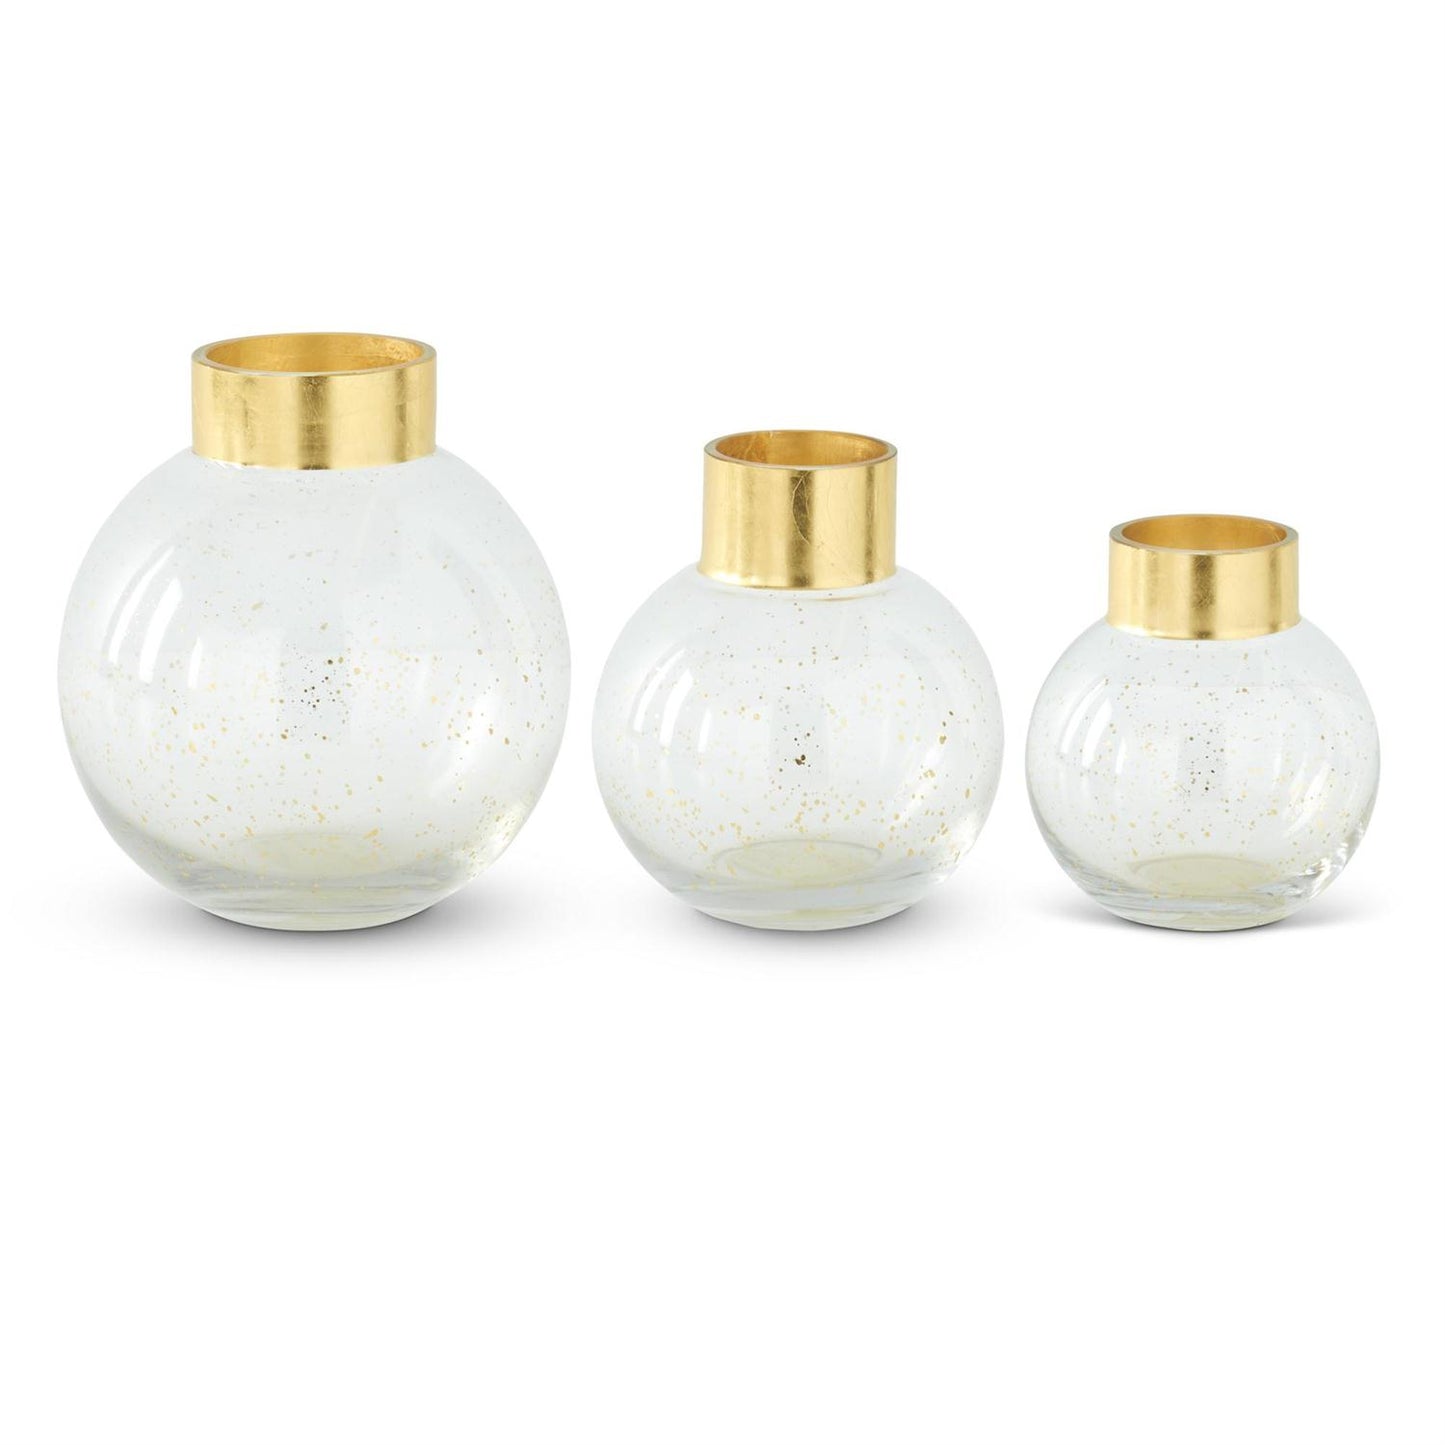 ROUND VASES WITH GOLD RIM AND SPLATTER